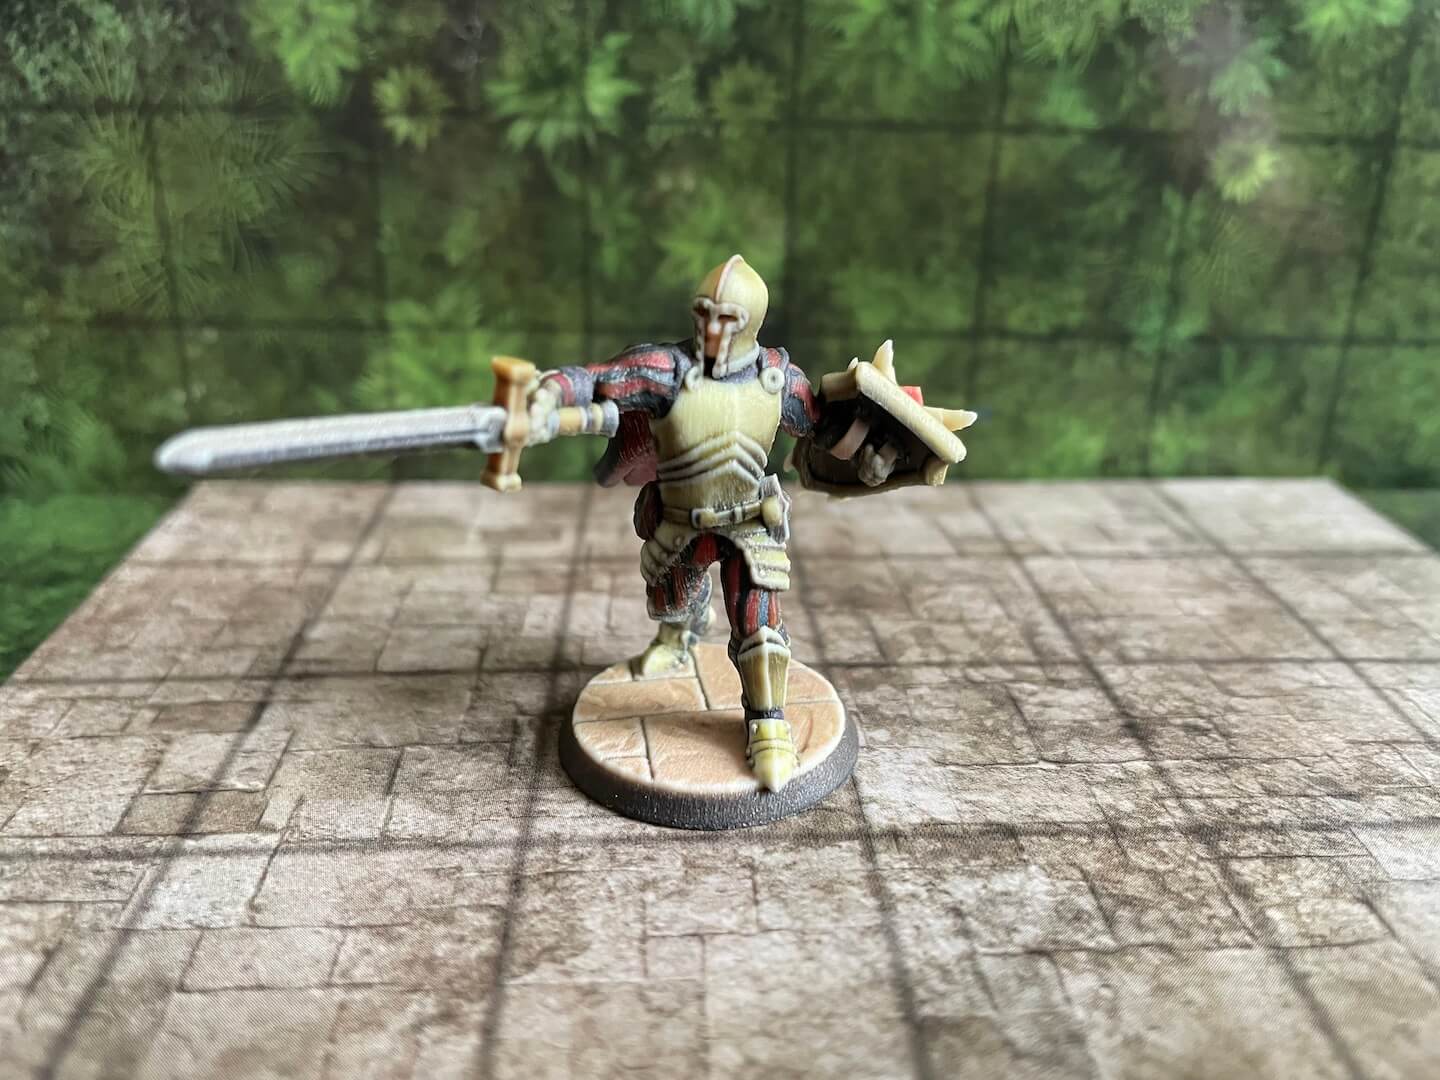 A Dragon Knight, pre-designed by Hero Forge.